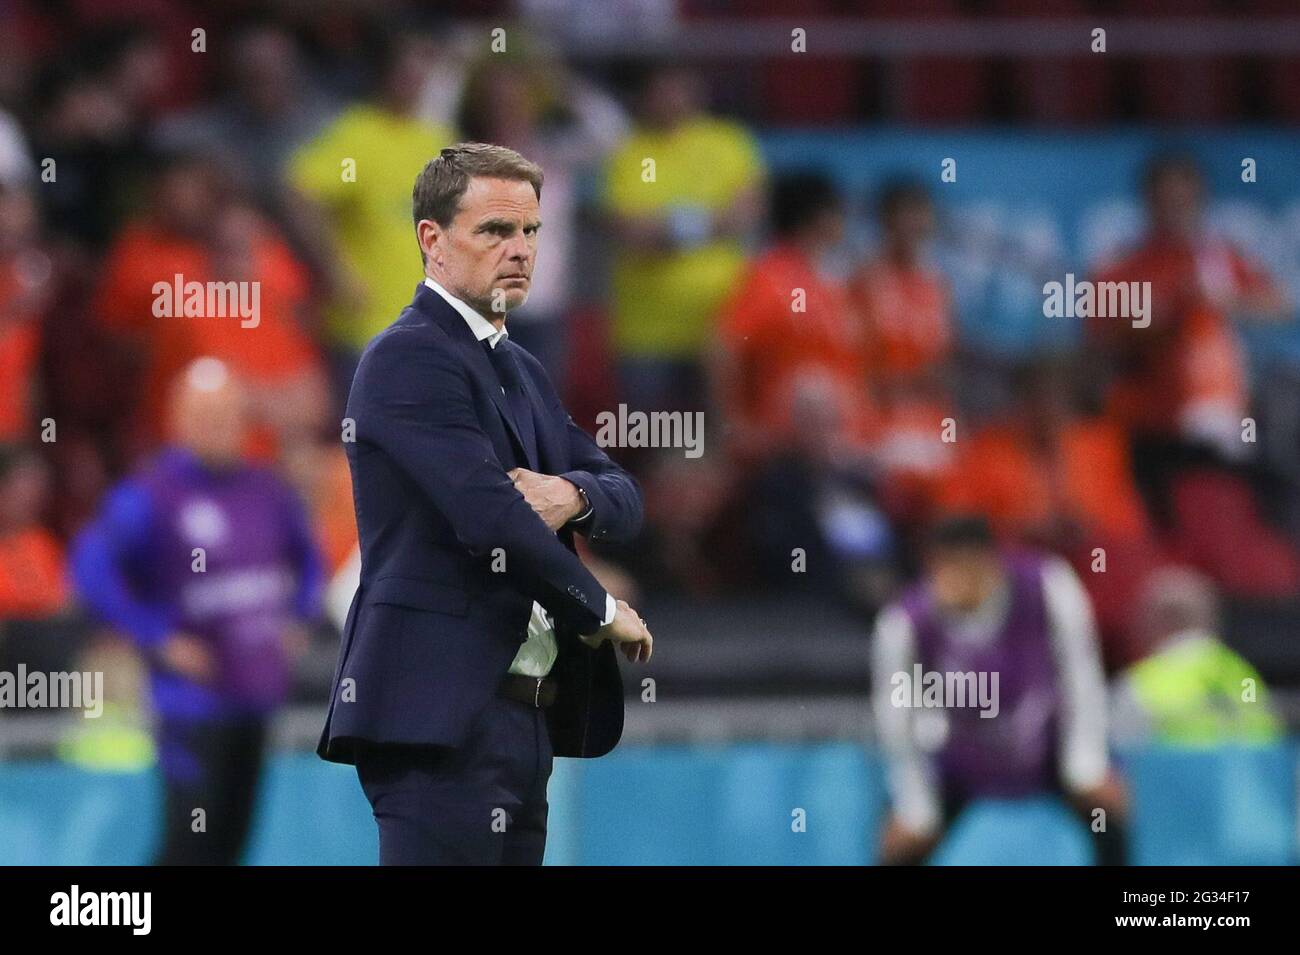 Amsterdam, Netherlands. 13th June, 2021. Coach Frank de Boer of the Netherlands reacts during the UEFA Euro 2020 Championship Group C match between the Netherlands and Ukraine in Amsterdam, the Netherlands, June 13, 2021. Credit: Zheng Huansong/Xinhua/Alamy Live News Stock Photo